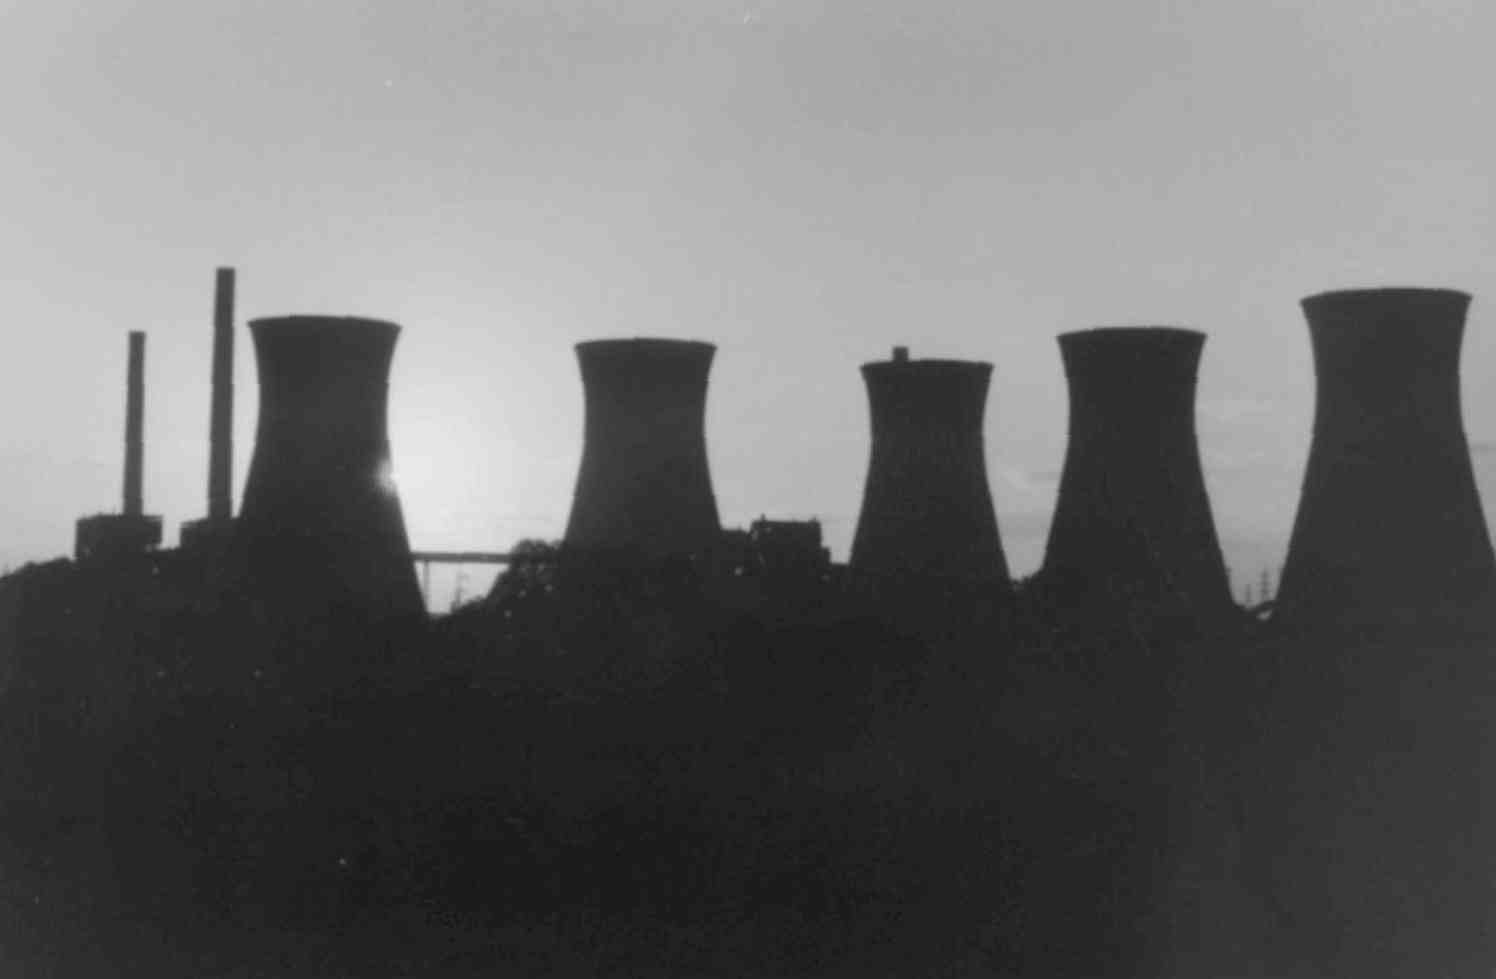 Cooling towers silouetted in a black & white image